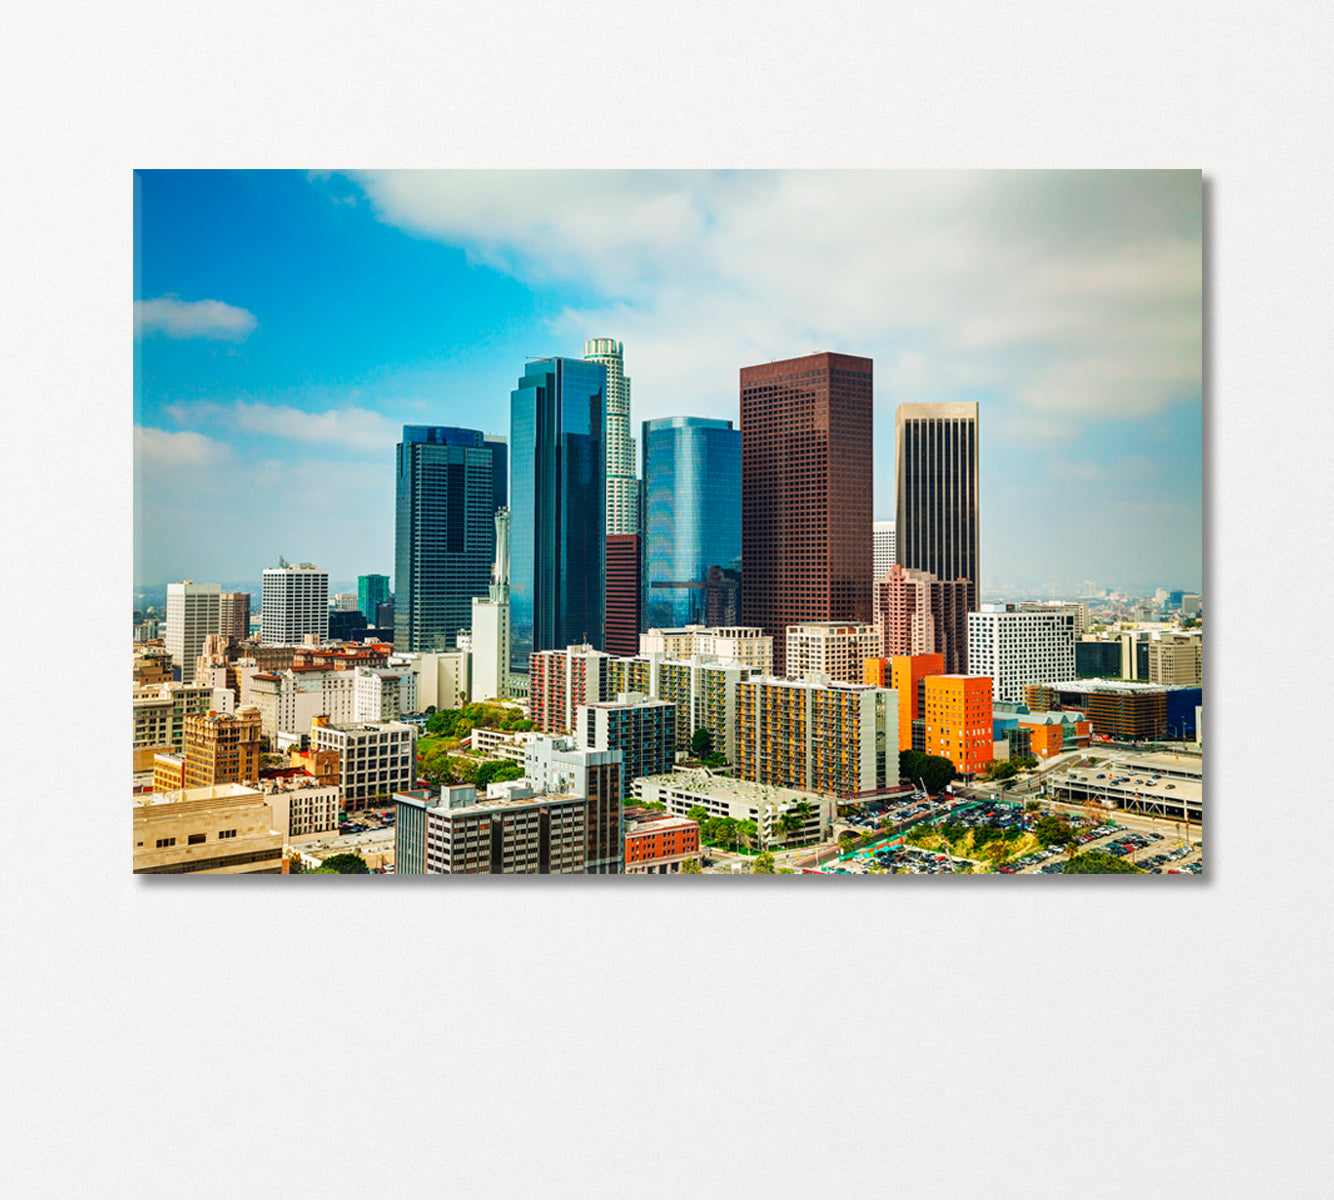 Los Angeles Cityscape on Sunny Day Canvas Print-Canvas Print-CetArt-1 Panel-24x16 inches-CetArt